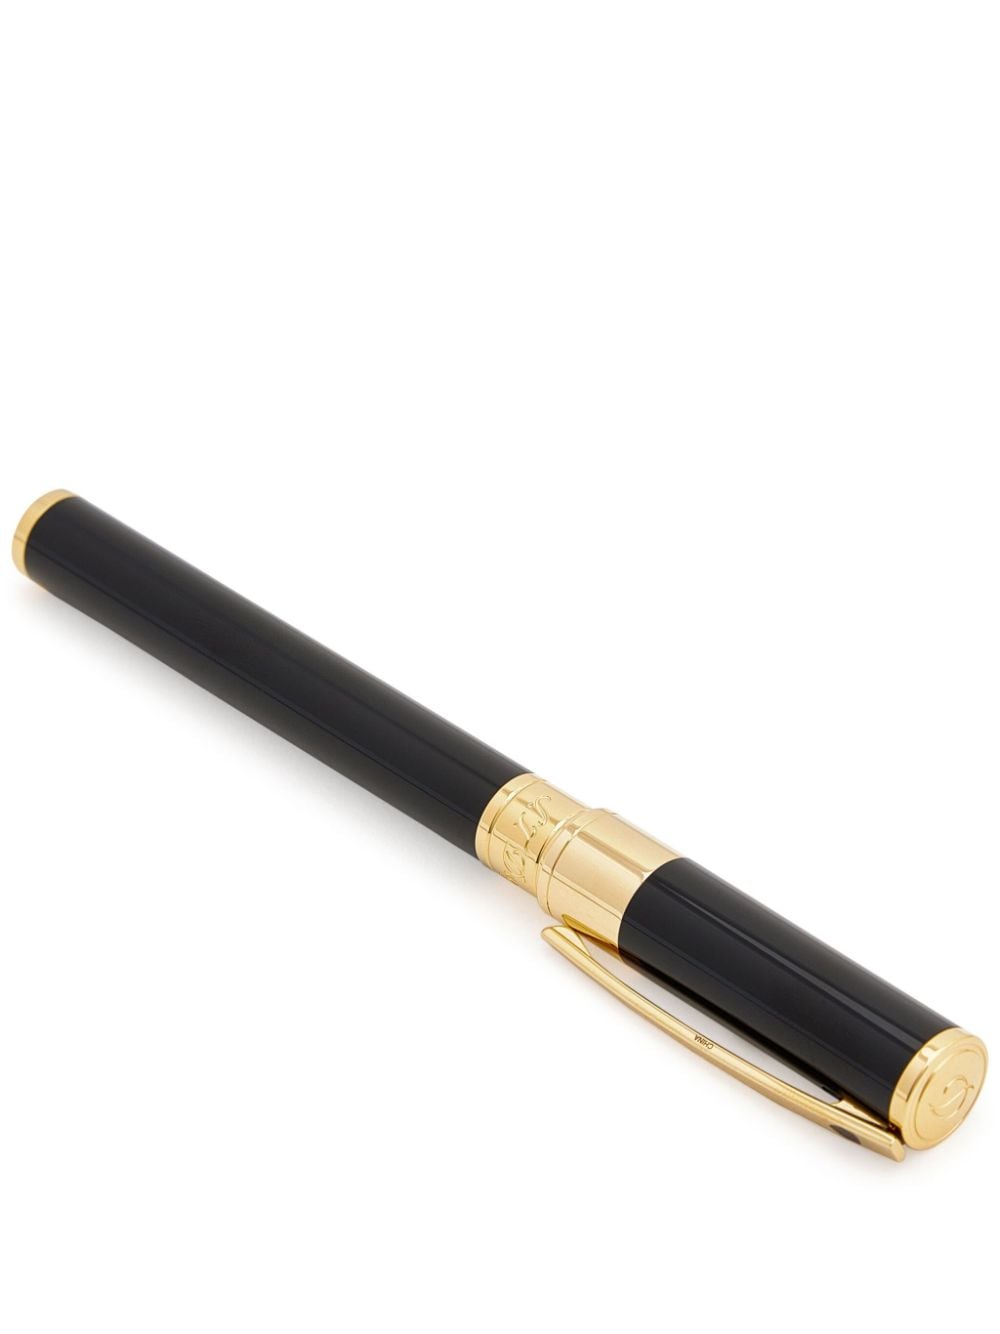 S.T. Dupont D-Initial rollerball pen - Black von S.T. Dupont